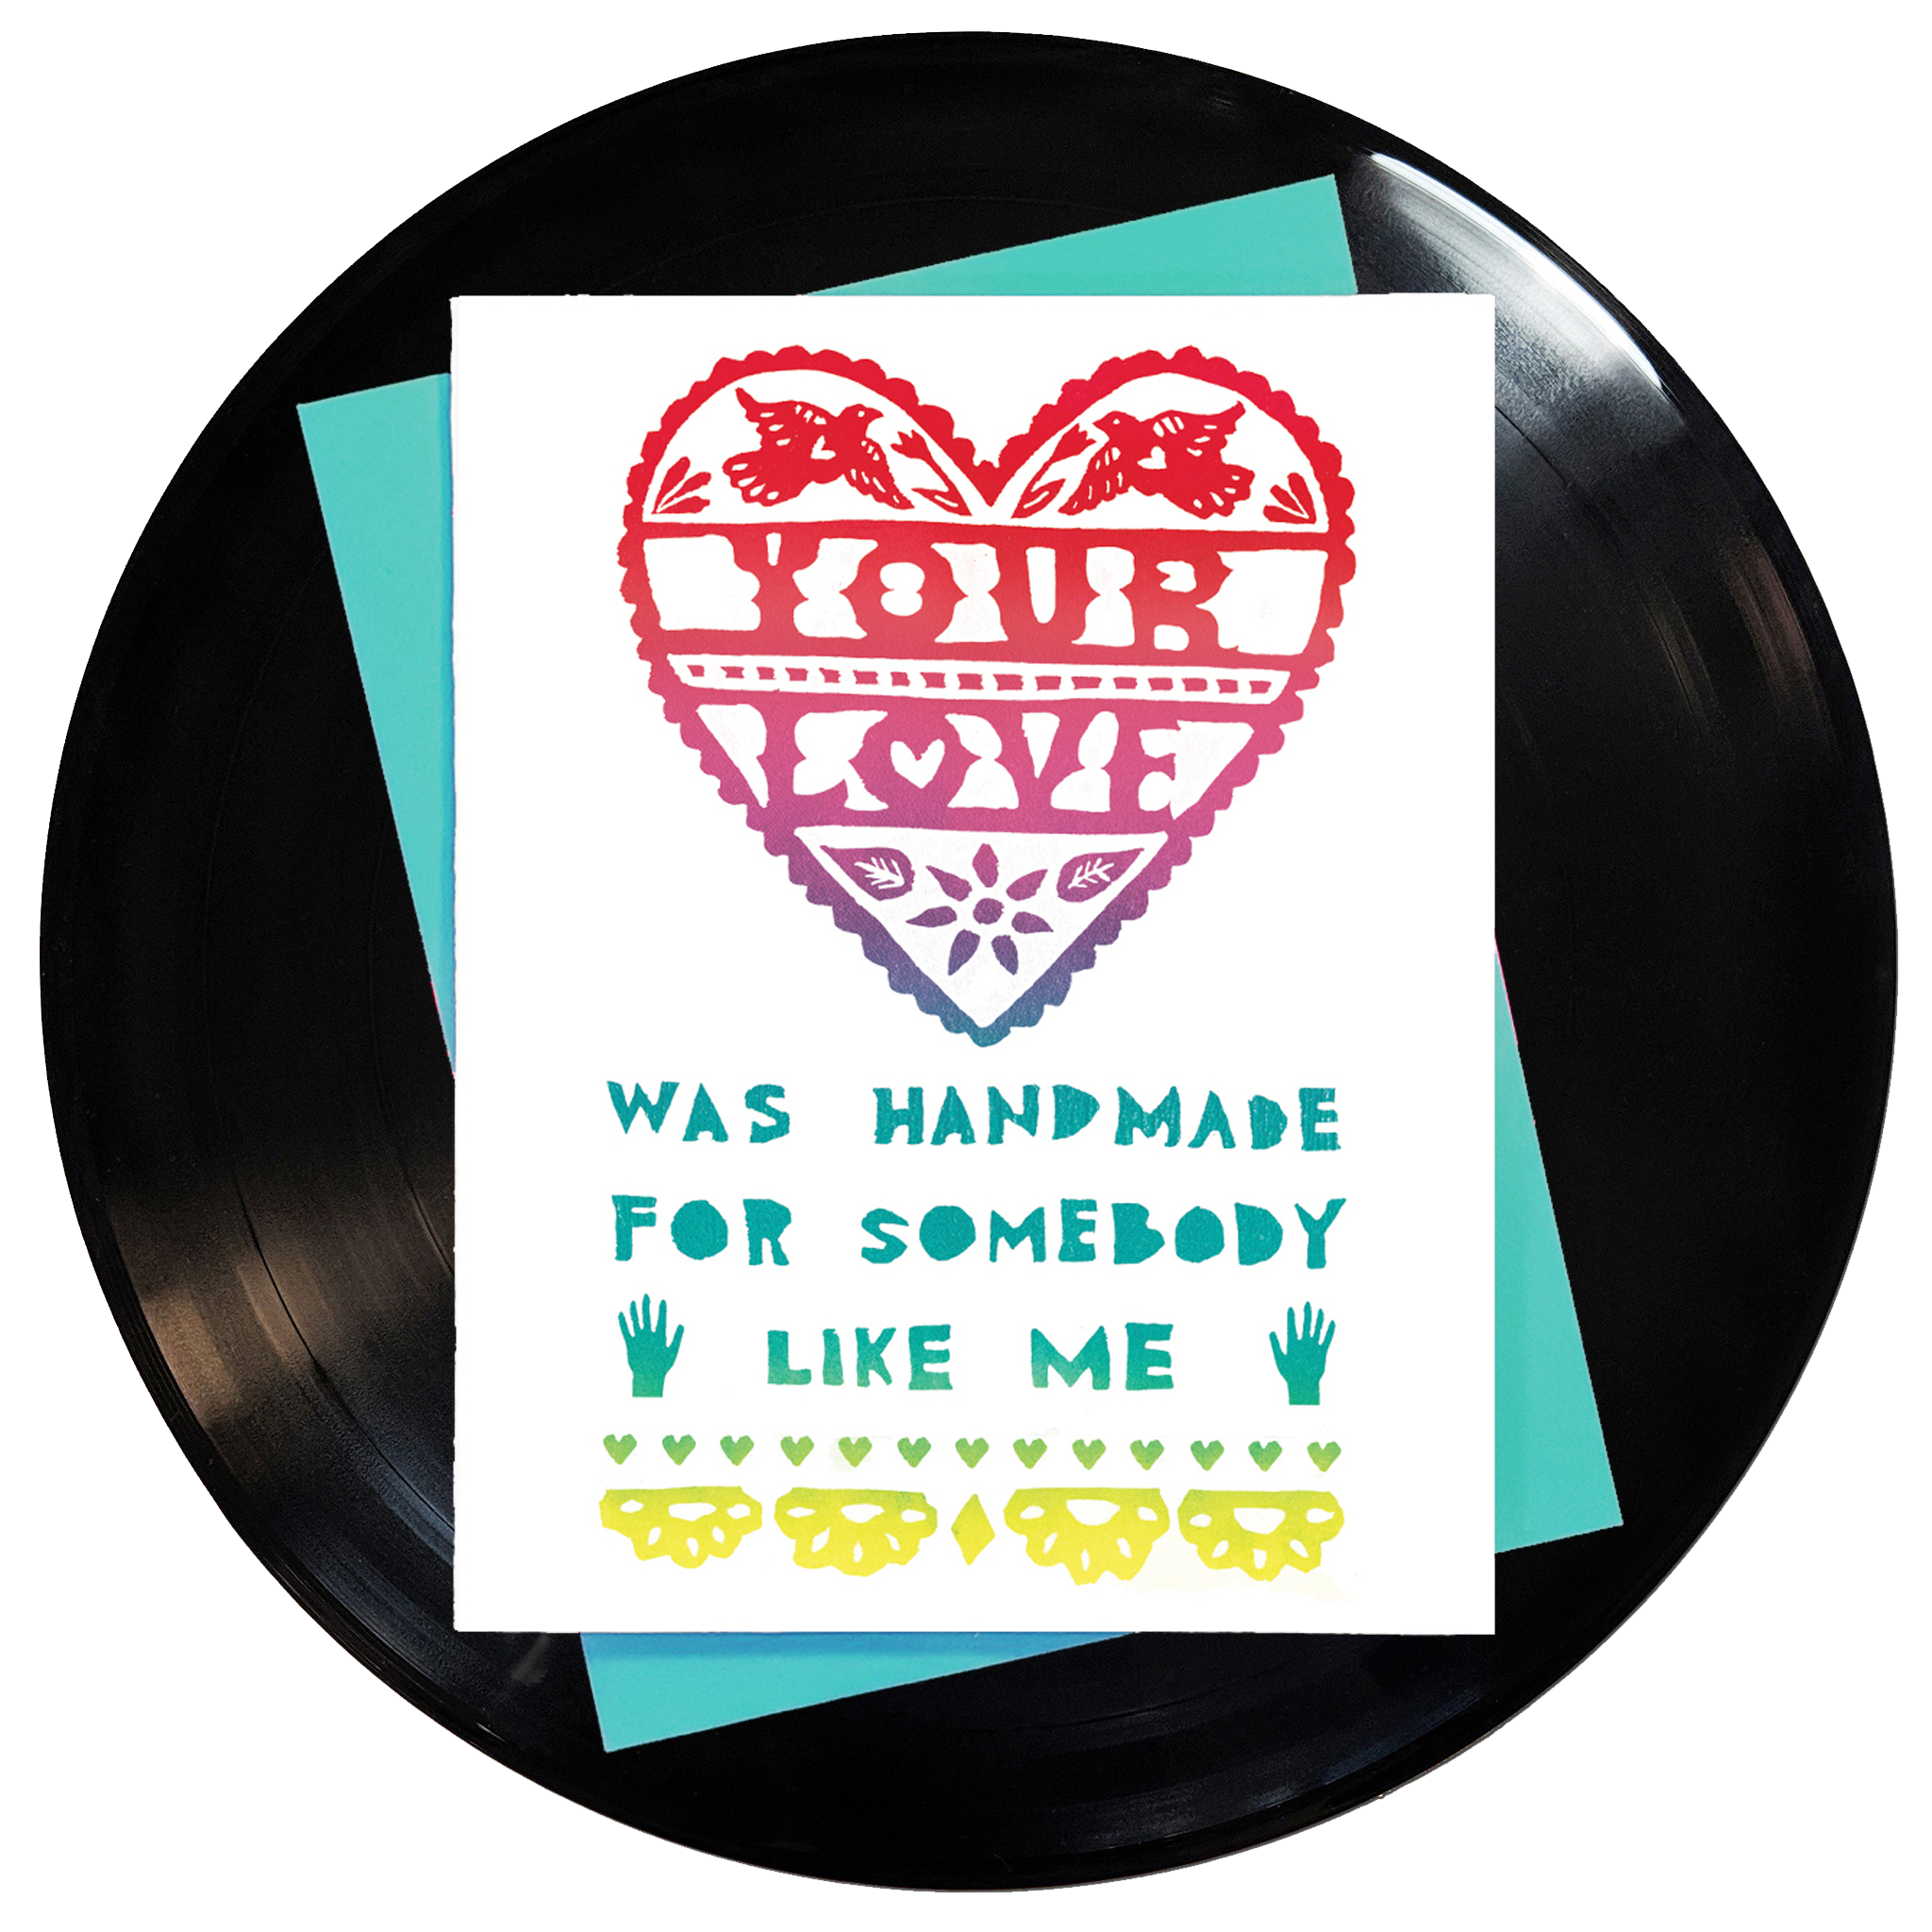 Your Love Was Handmade Greeting Card 6-Pack Inspired By Music